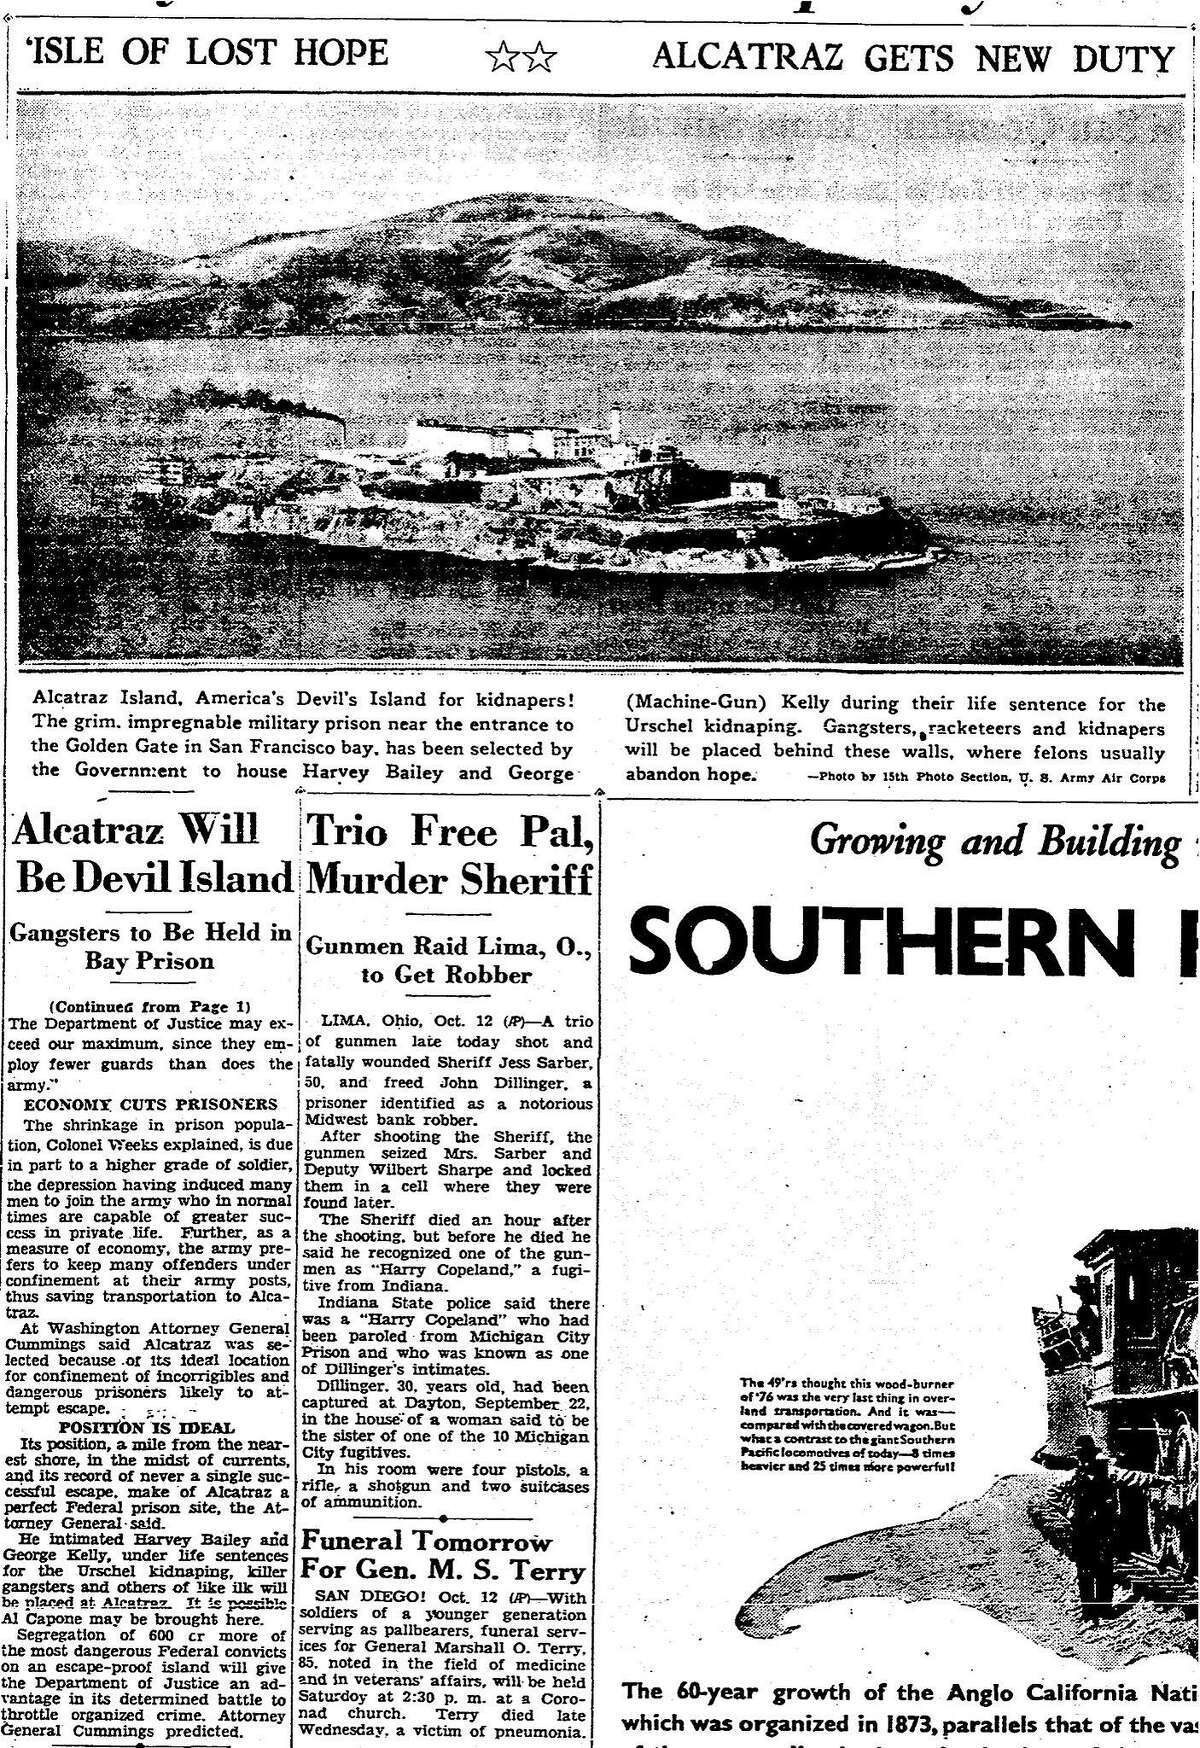 On October 13, 1933 the Chronicle reported on the announcement that the former U.S. Army disciplinary barricades on Alcatraz island would be turned into a federal prison.